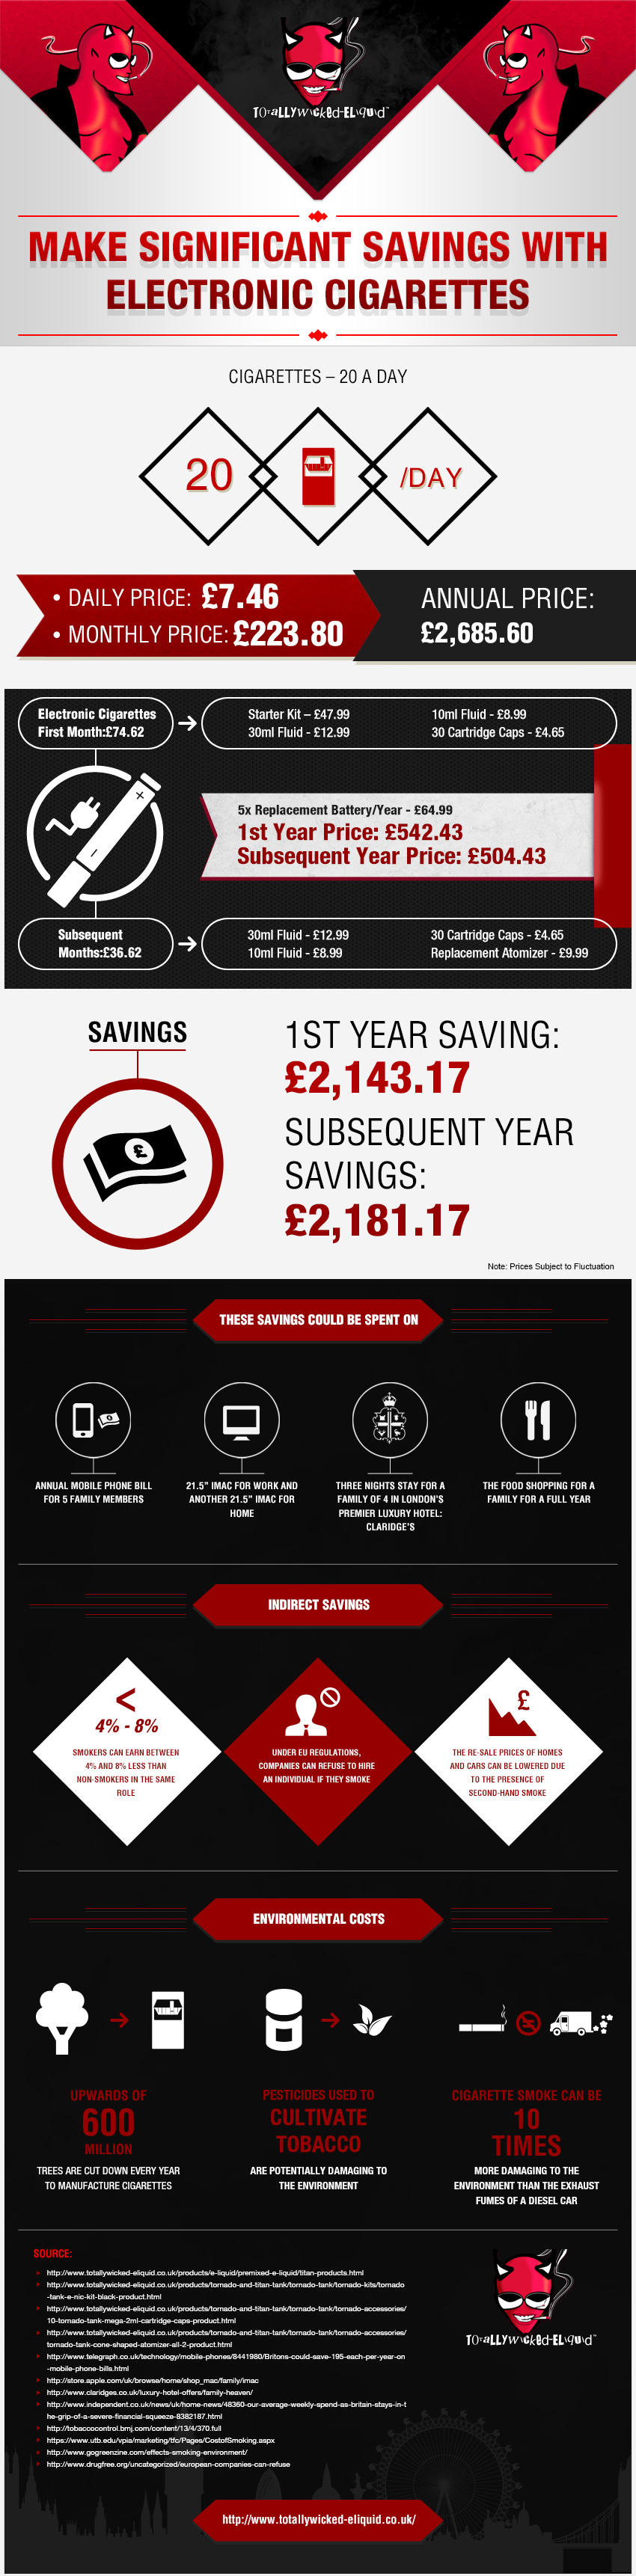 Save Significant Money By Switching To Electronic Cigarettes - Infographic